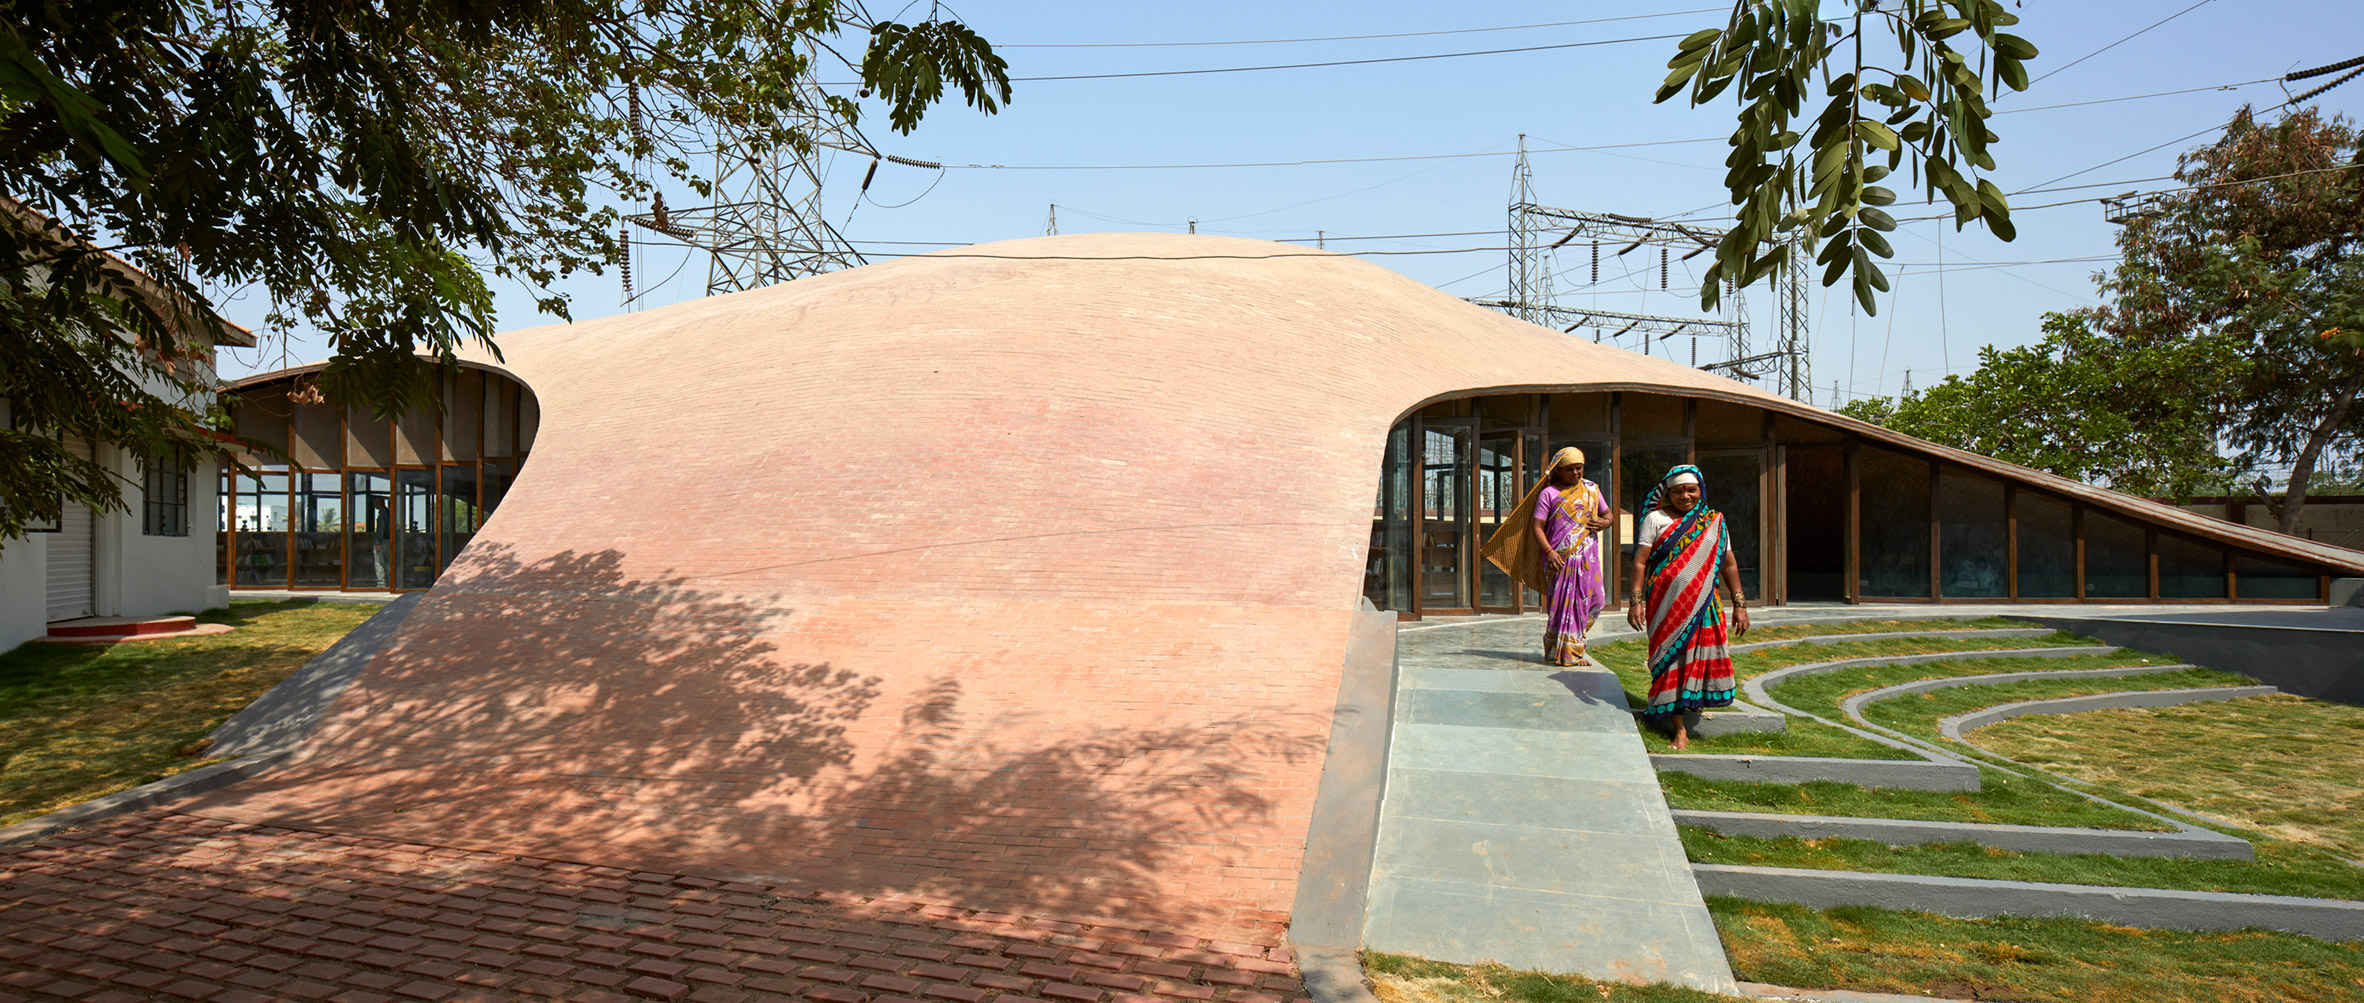 Sameep Padora creates undulating brick roof to cover school library in India